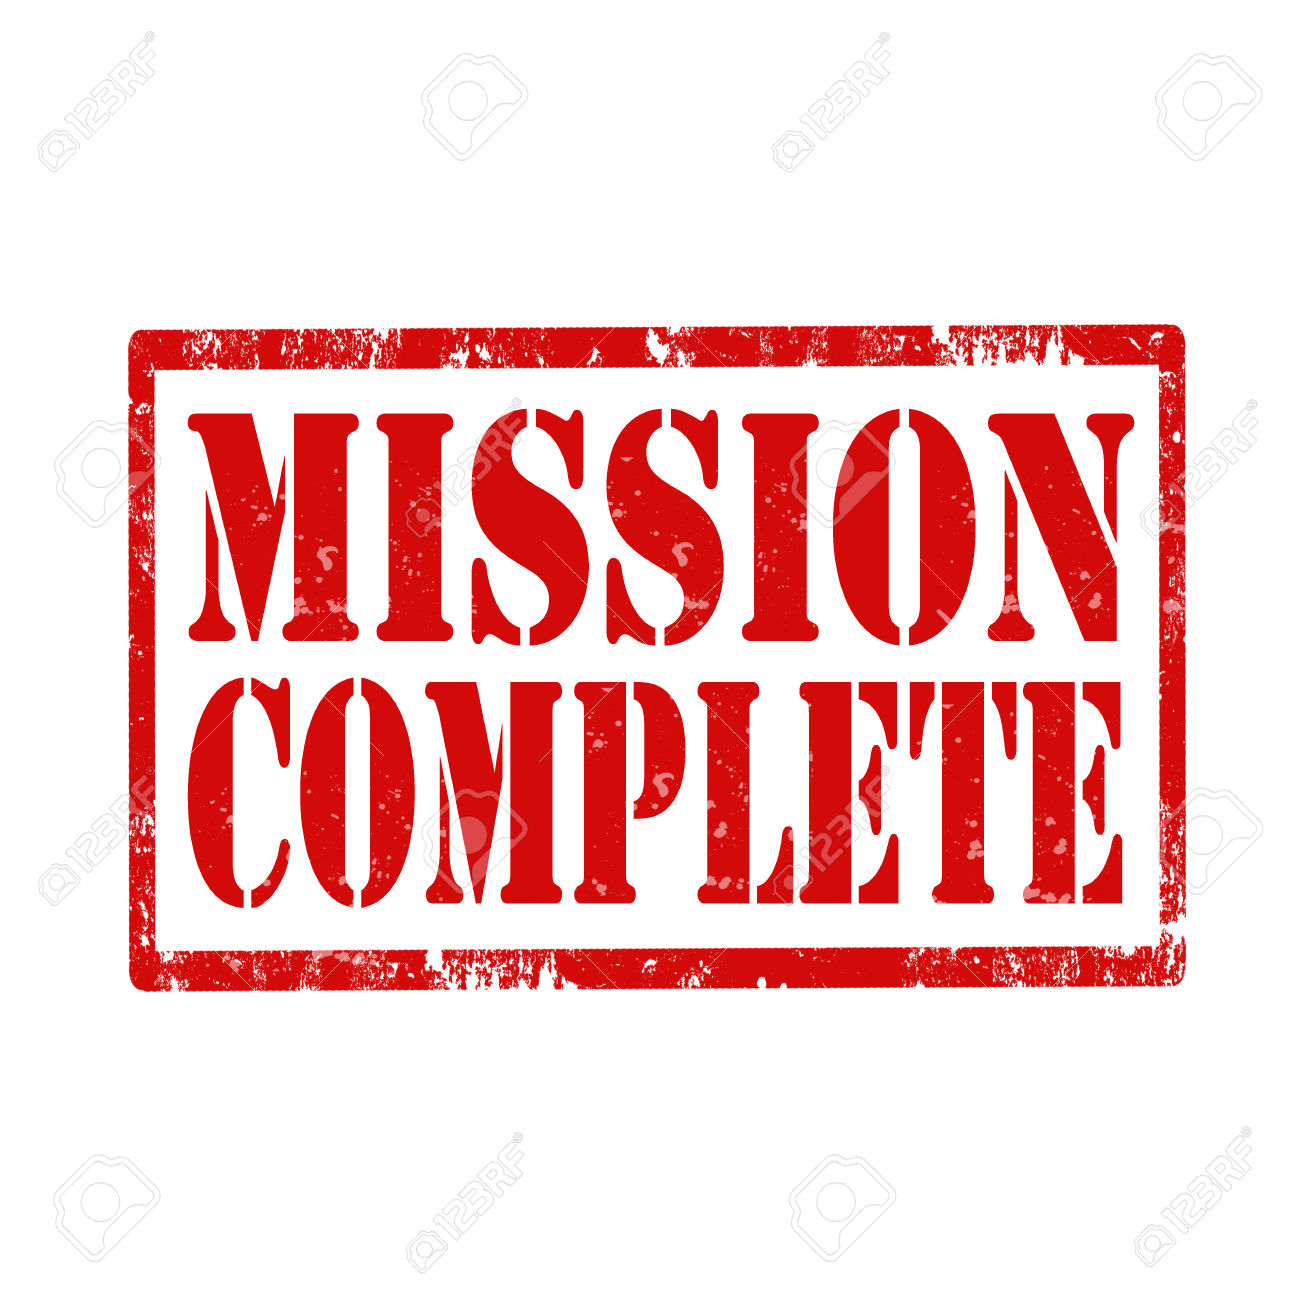 missions clipart complete